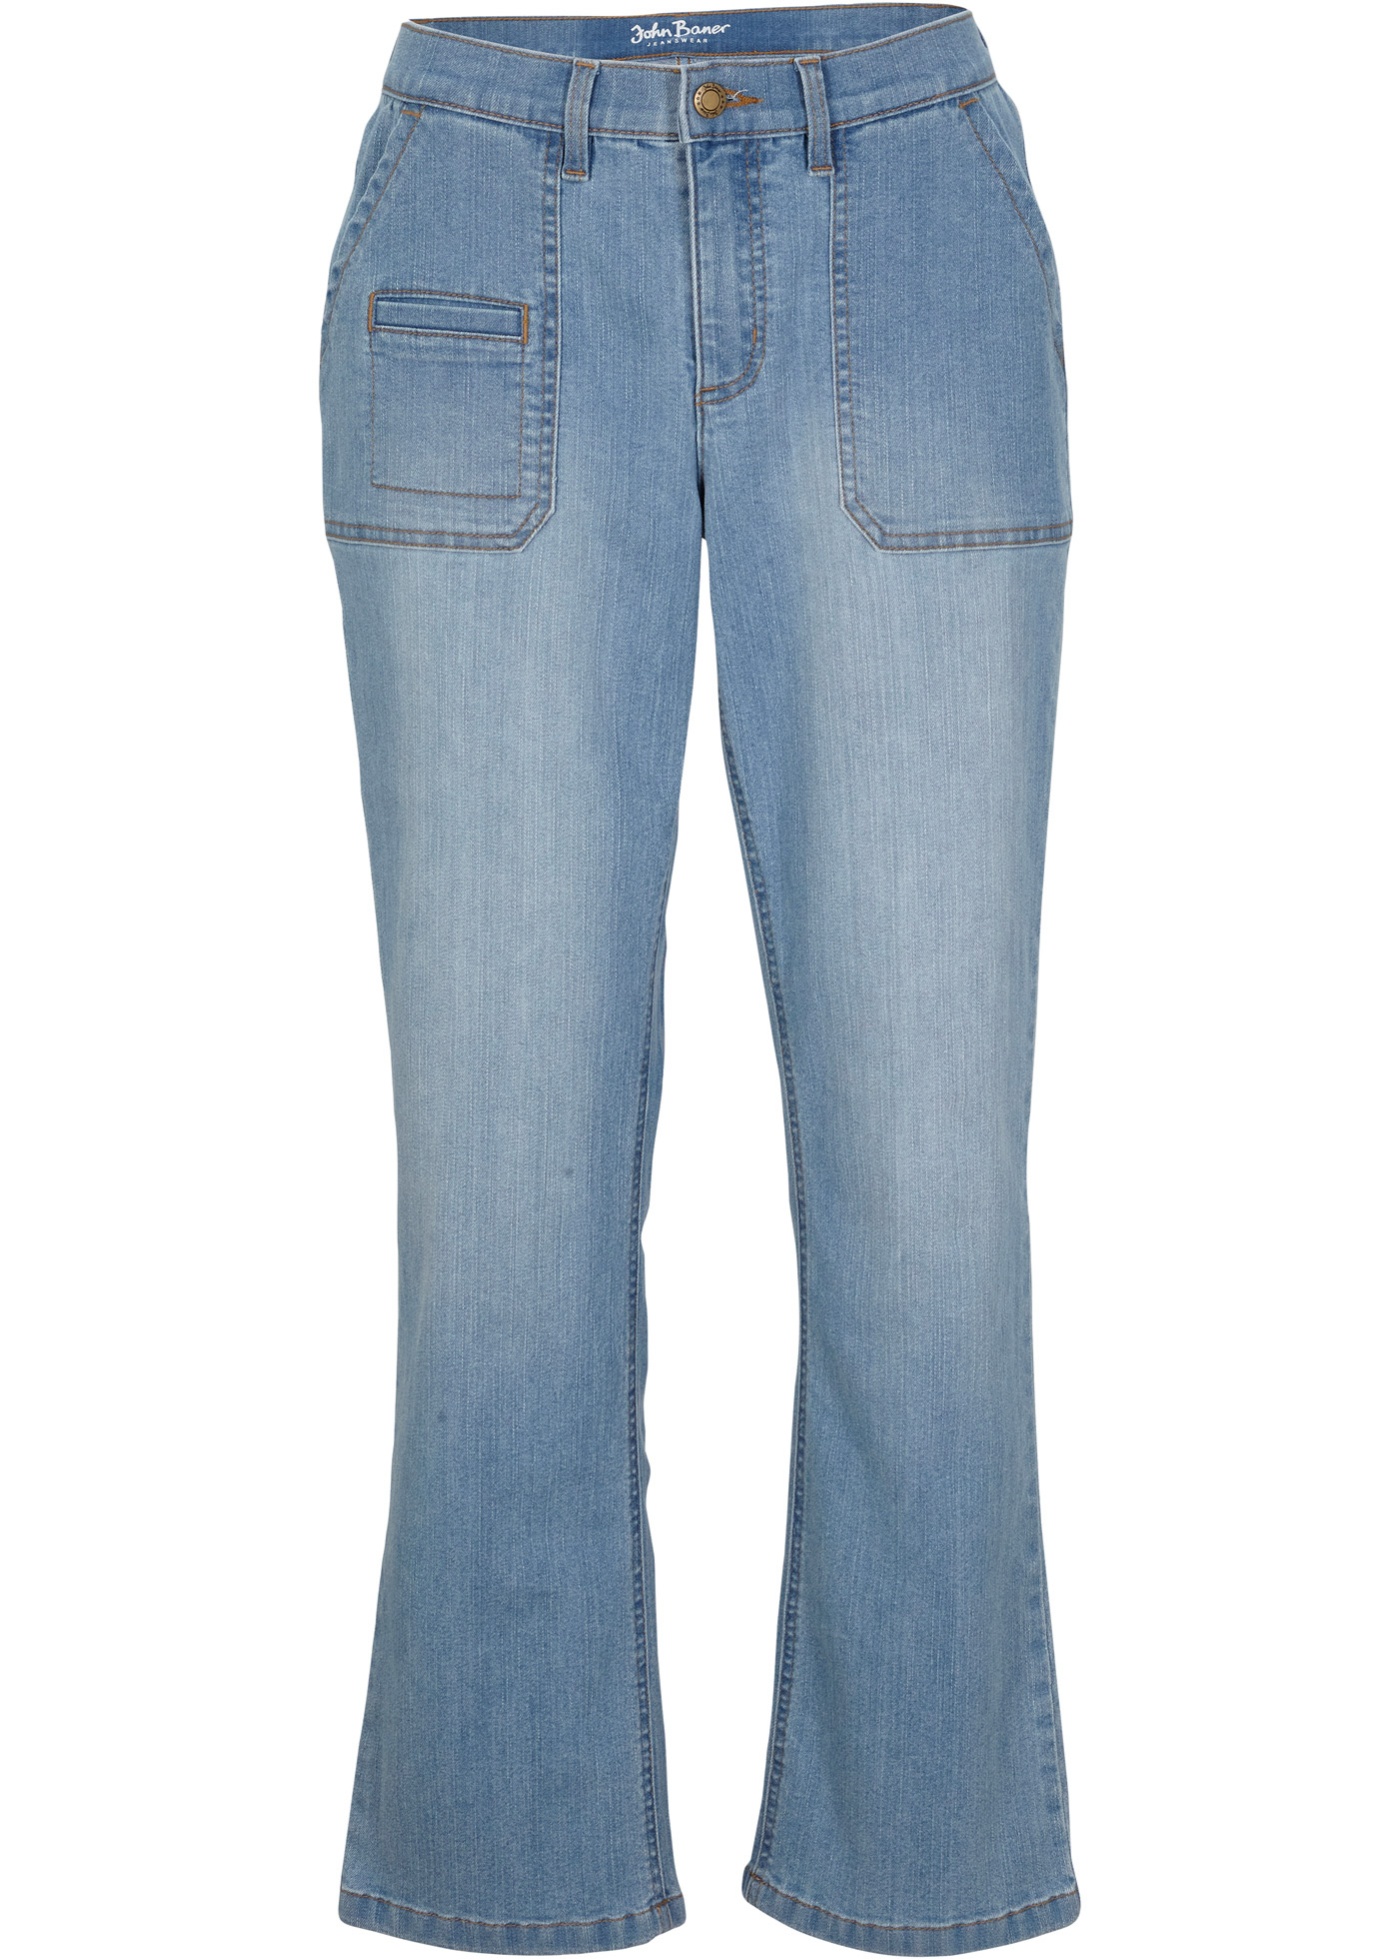 Stretch jeans, cropped